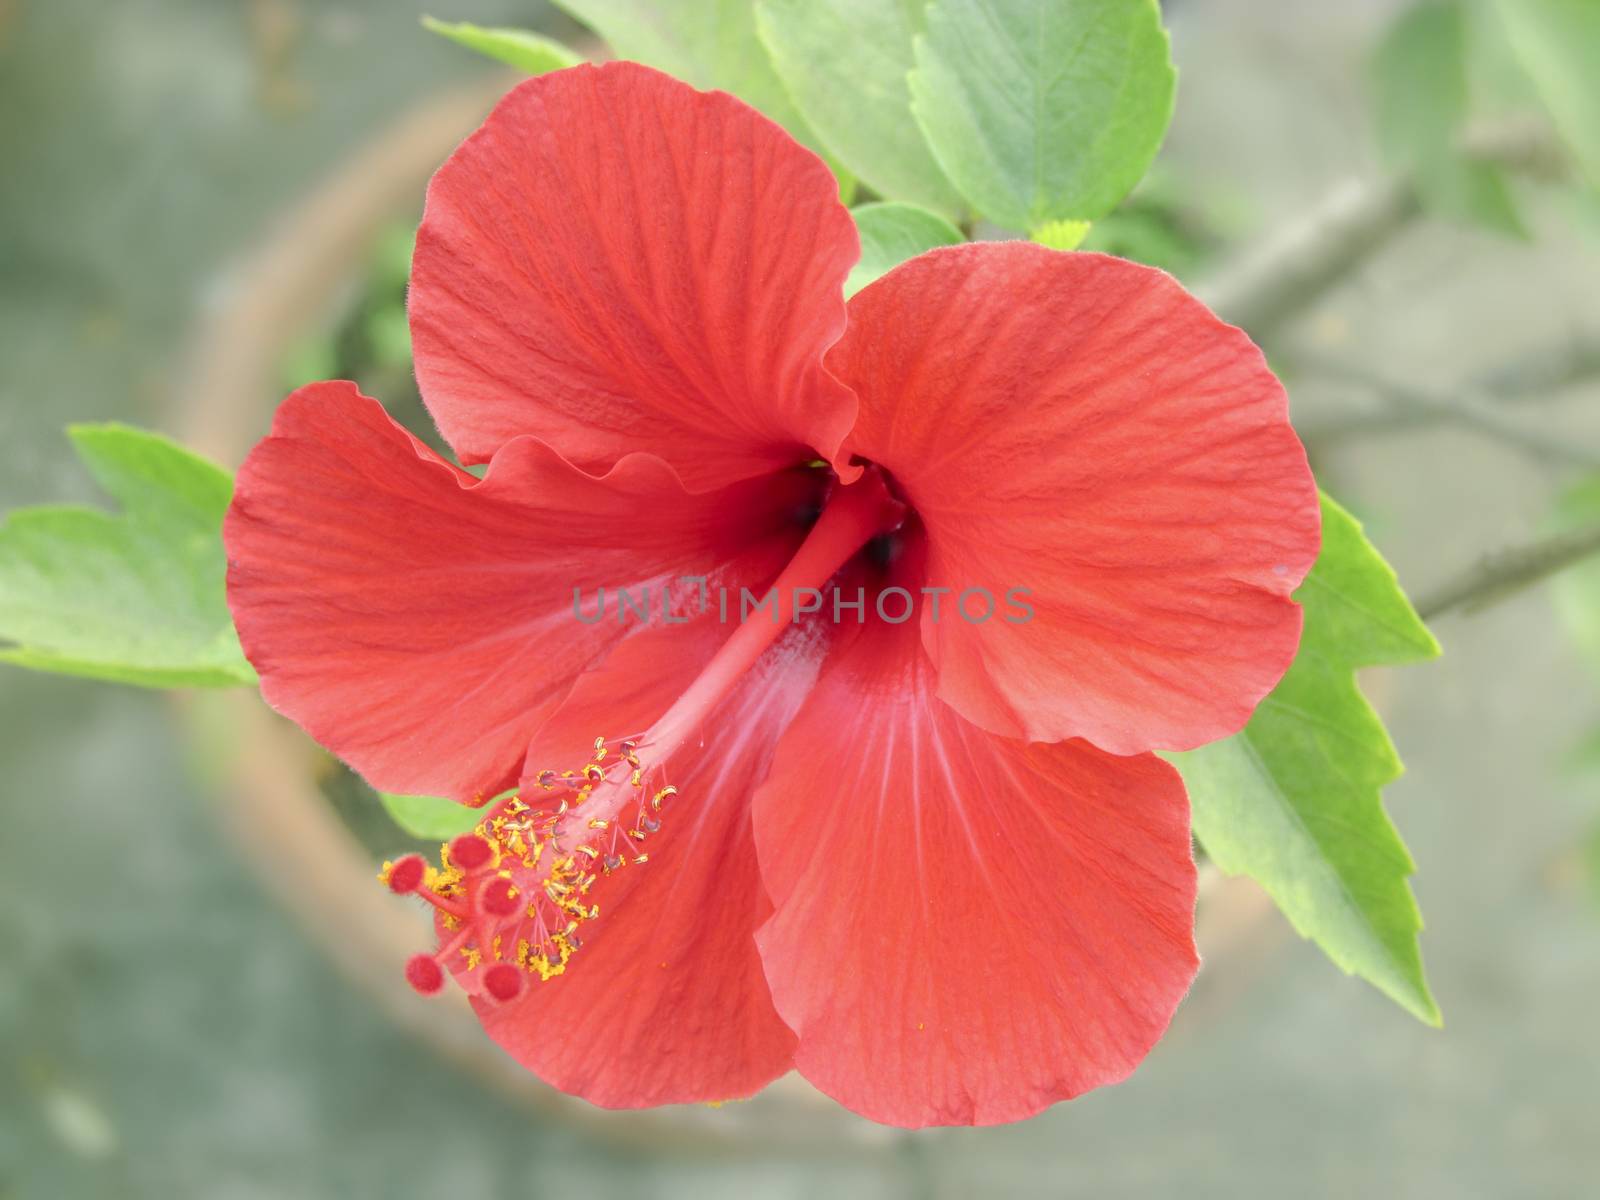 Red hibiscus flower from front view by drpgayen